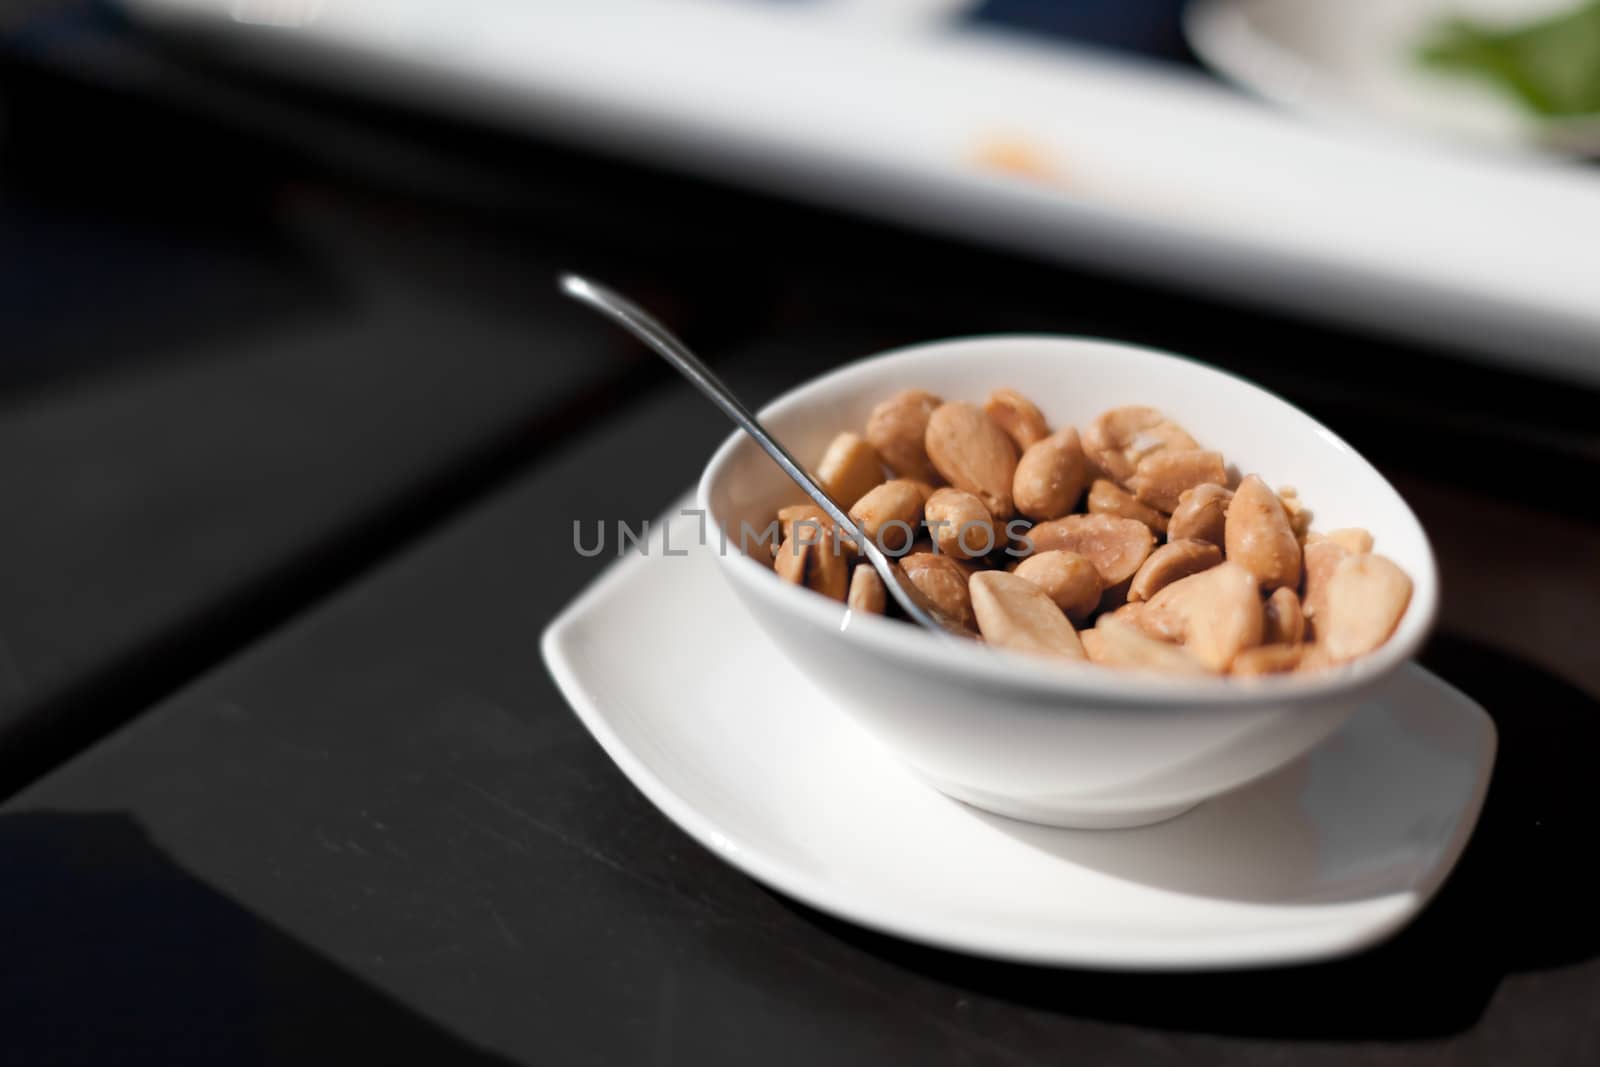 Nuts in a tray on a table